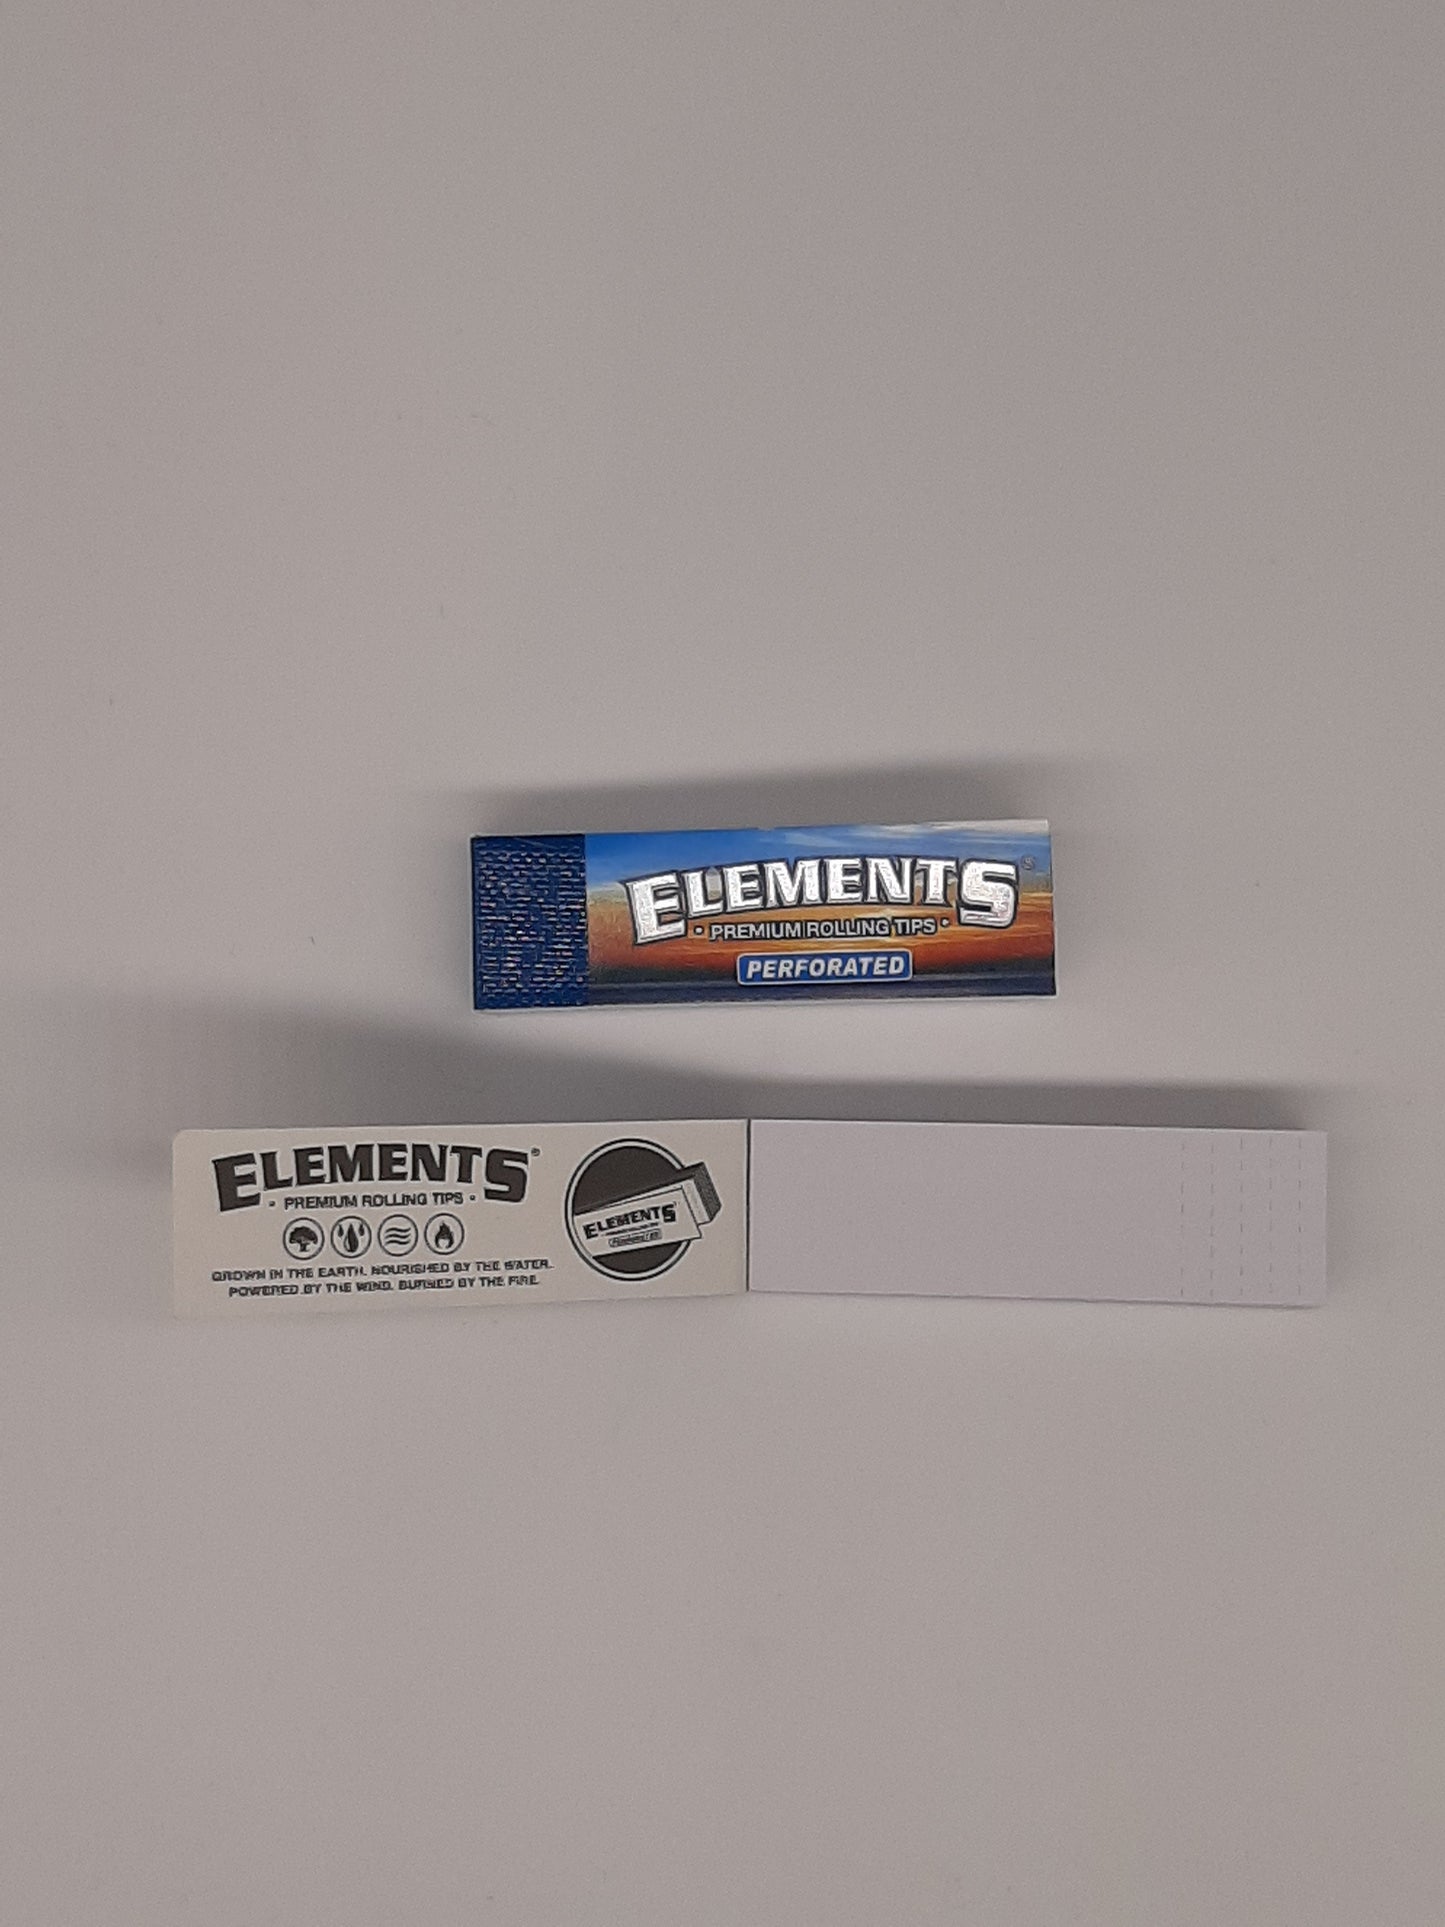 ELEMENTS Perforated Tips